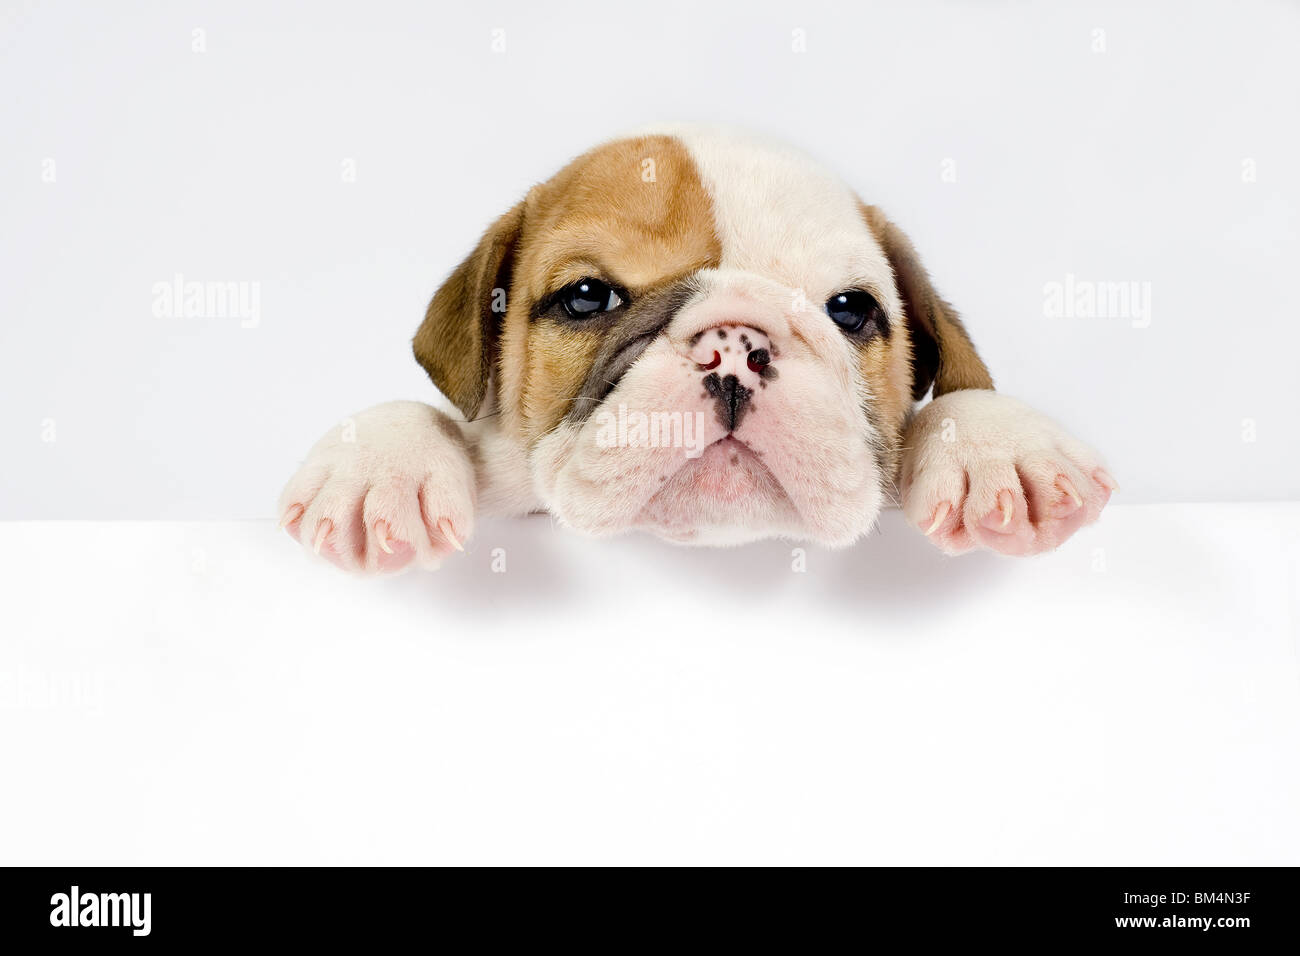 English Bulldog puppy in front of white background with space for text. Stock Photo